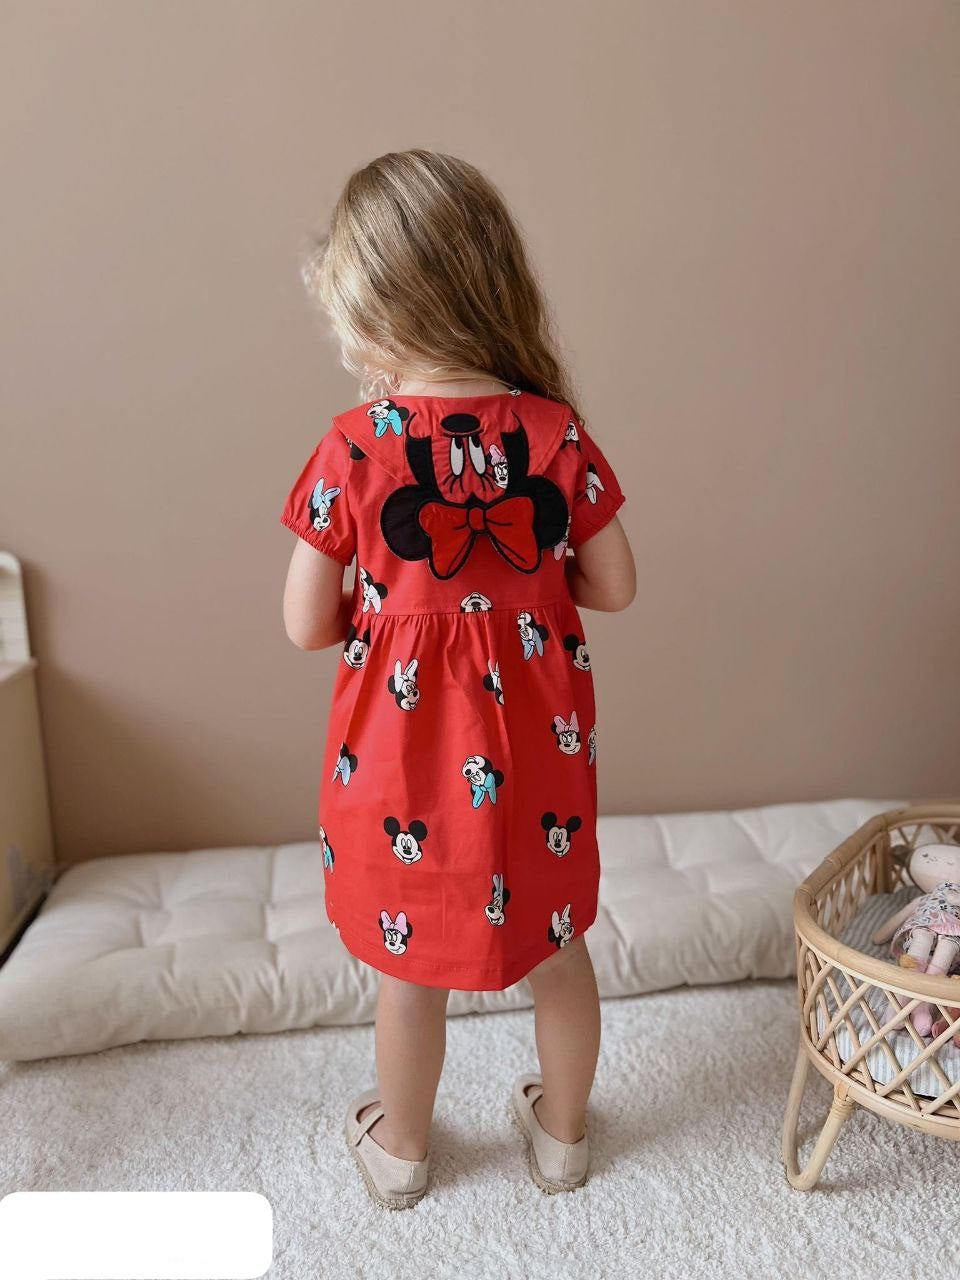 Minnie Mouse All over Print Dress - Red